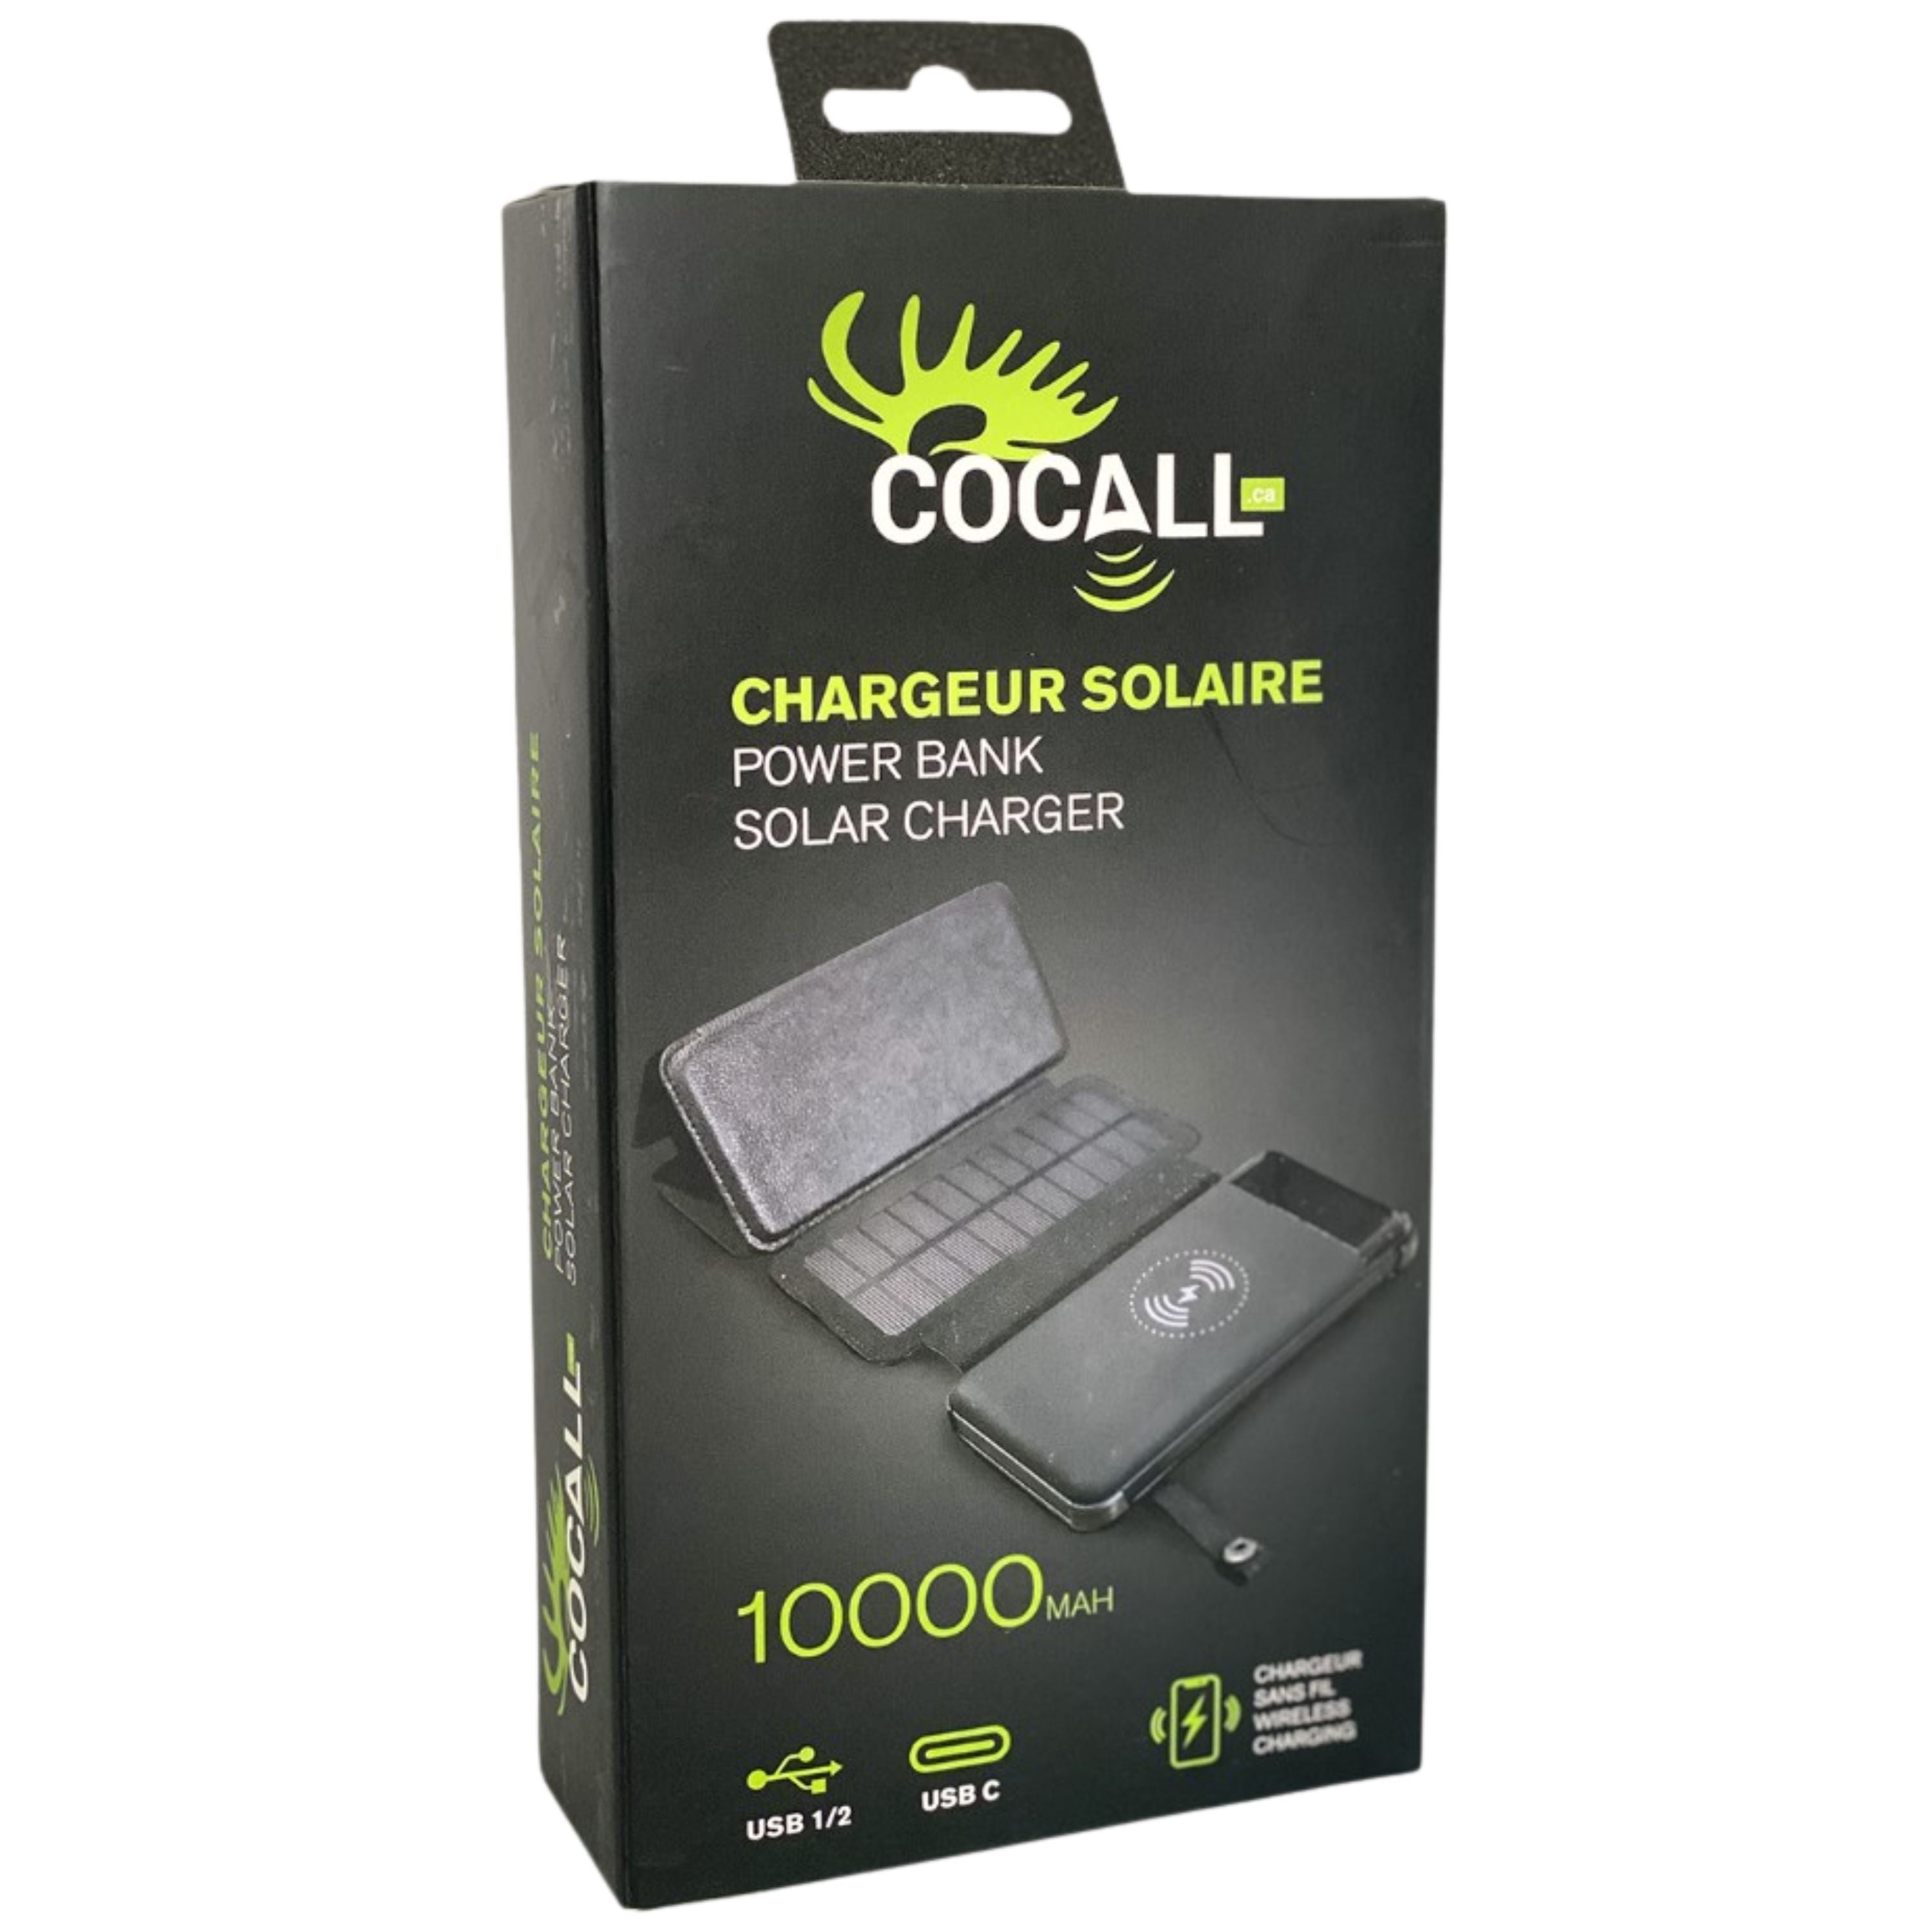 Portable solar charger for Cocall